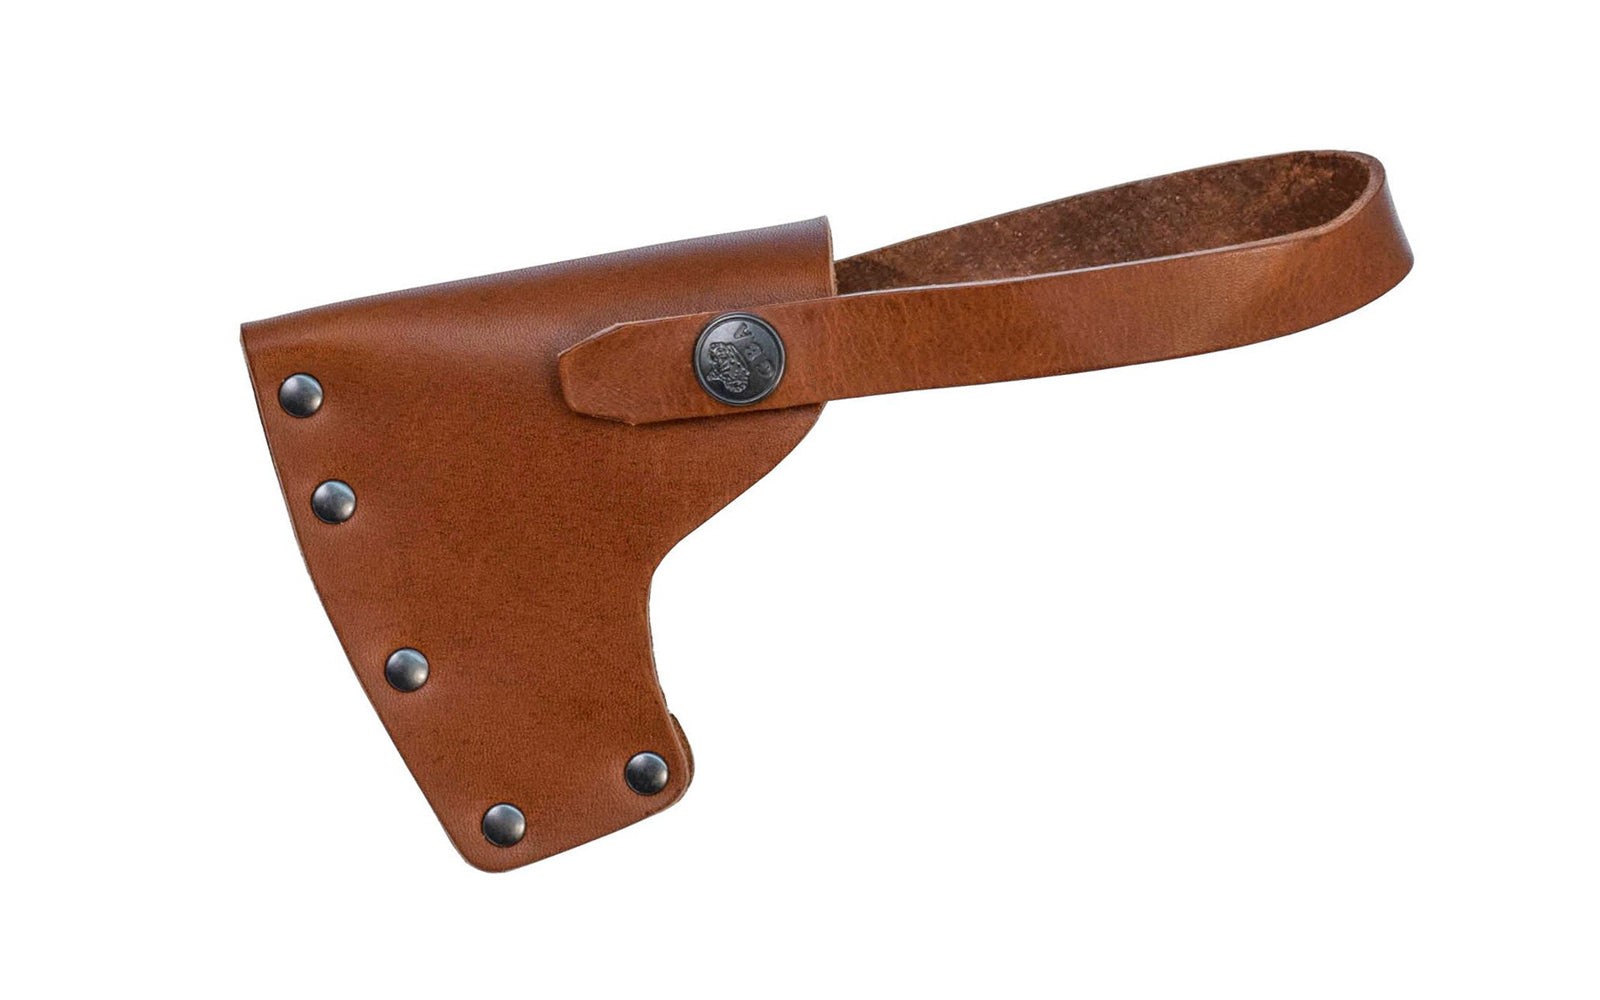 Gränsfors Bruk grain leather sheath is designed for the Splitting Axe No. 442 & Long Splitting Axe No. 445. The vegetable-tanned leather is free from heavy metals & is biodegradable. 7391765442086. Model 442C